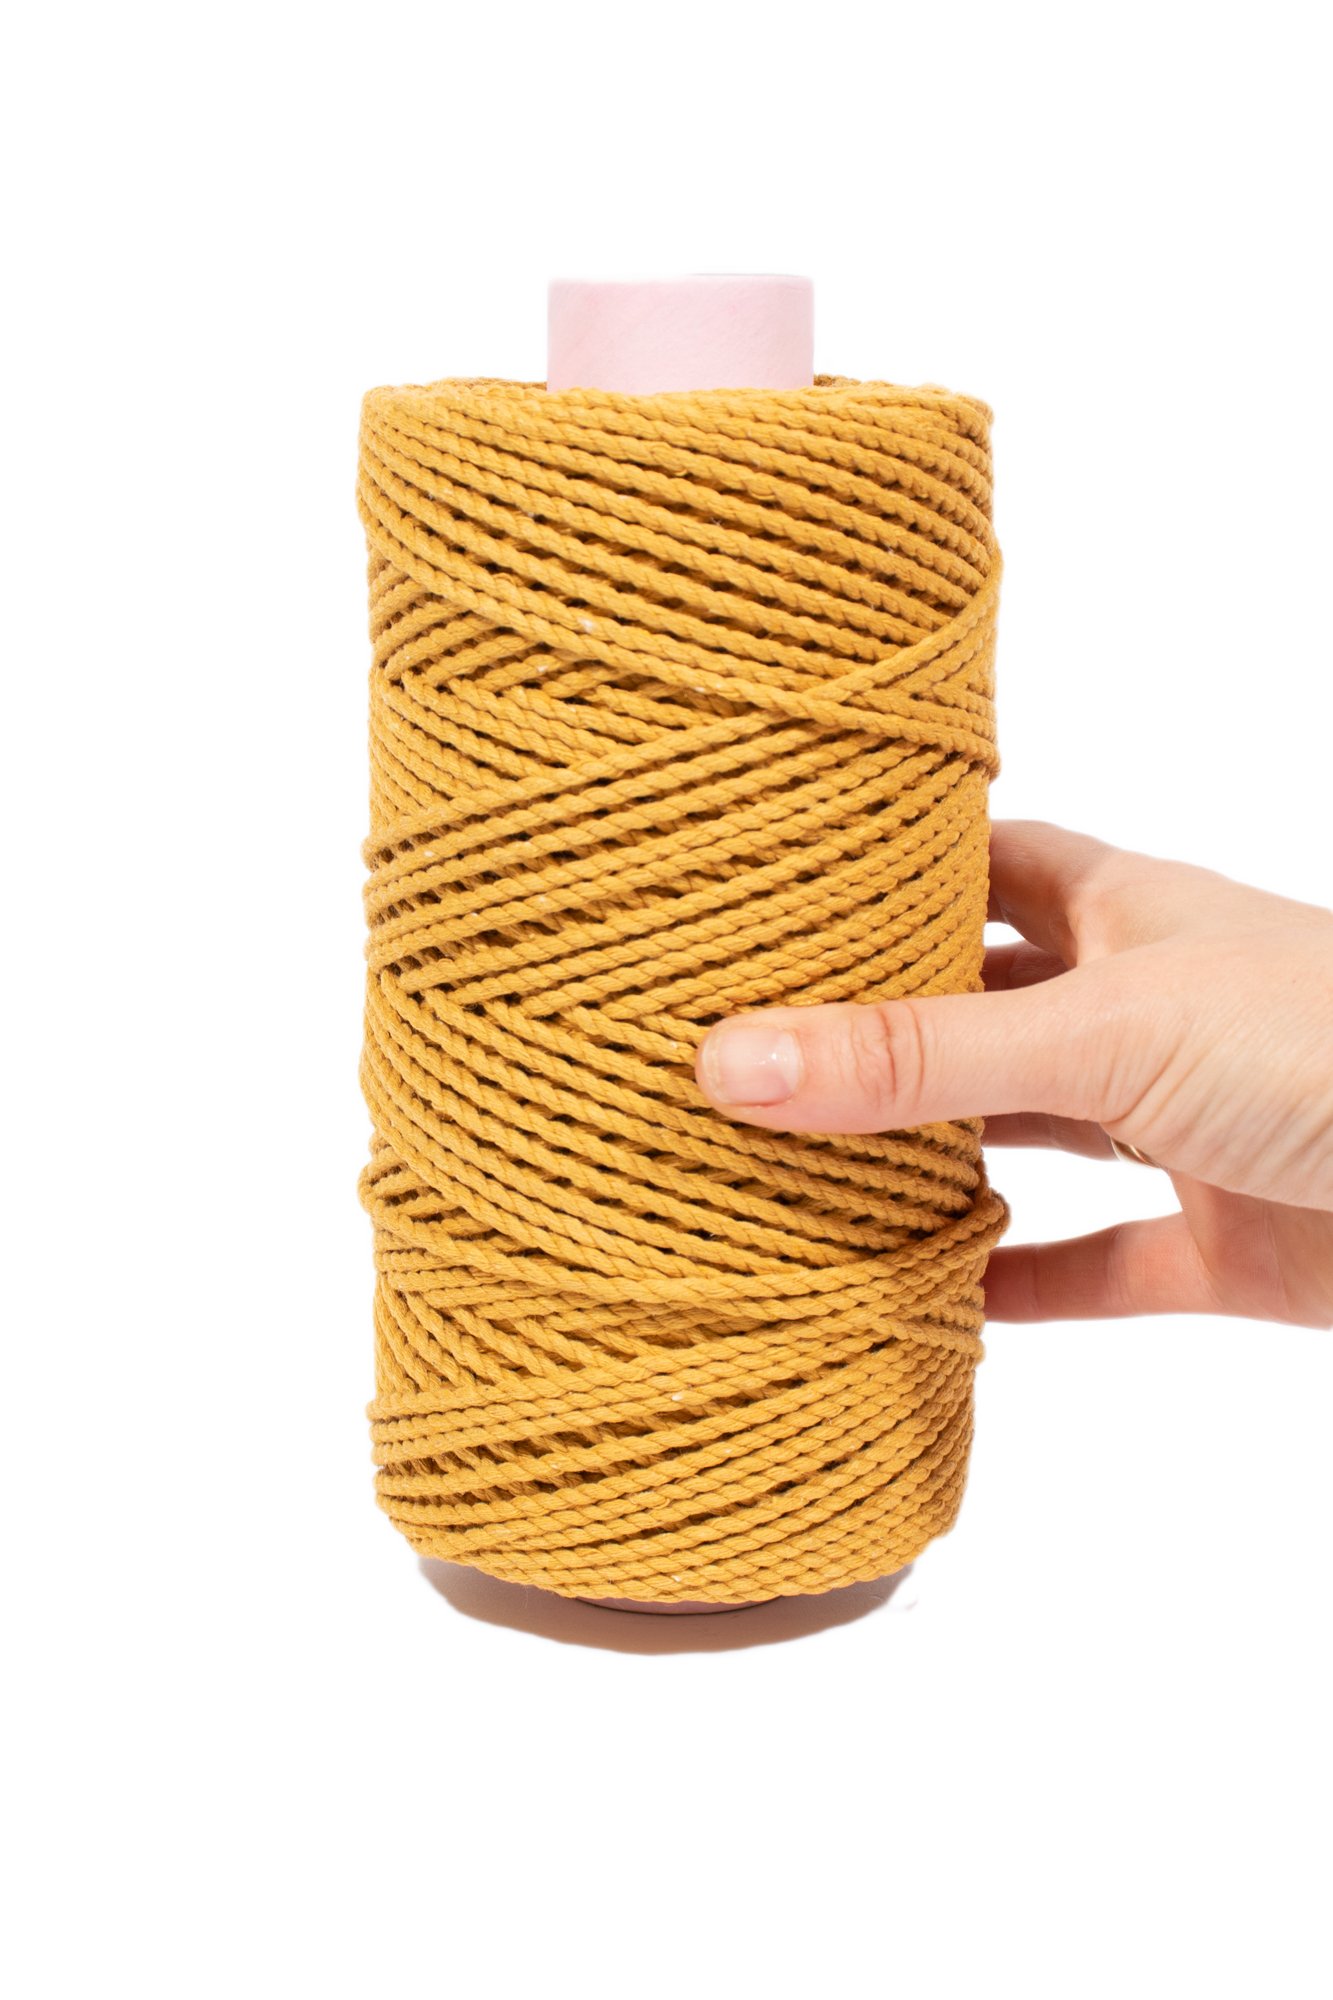 3mm 100% Recycled Cotton Rope - 500ft spool